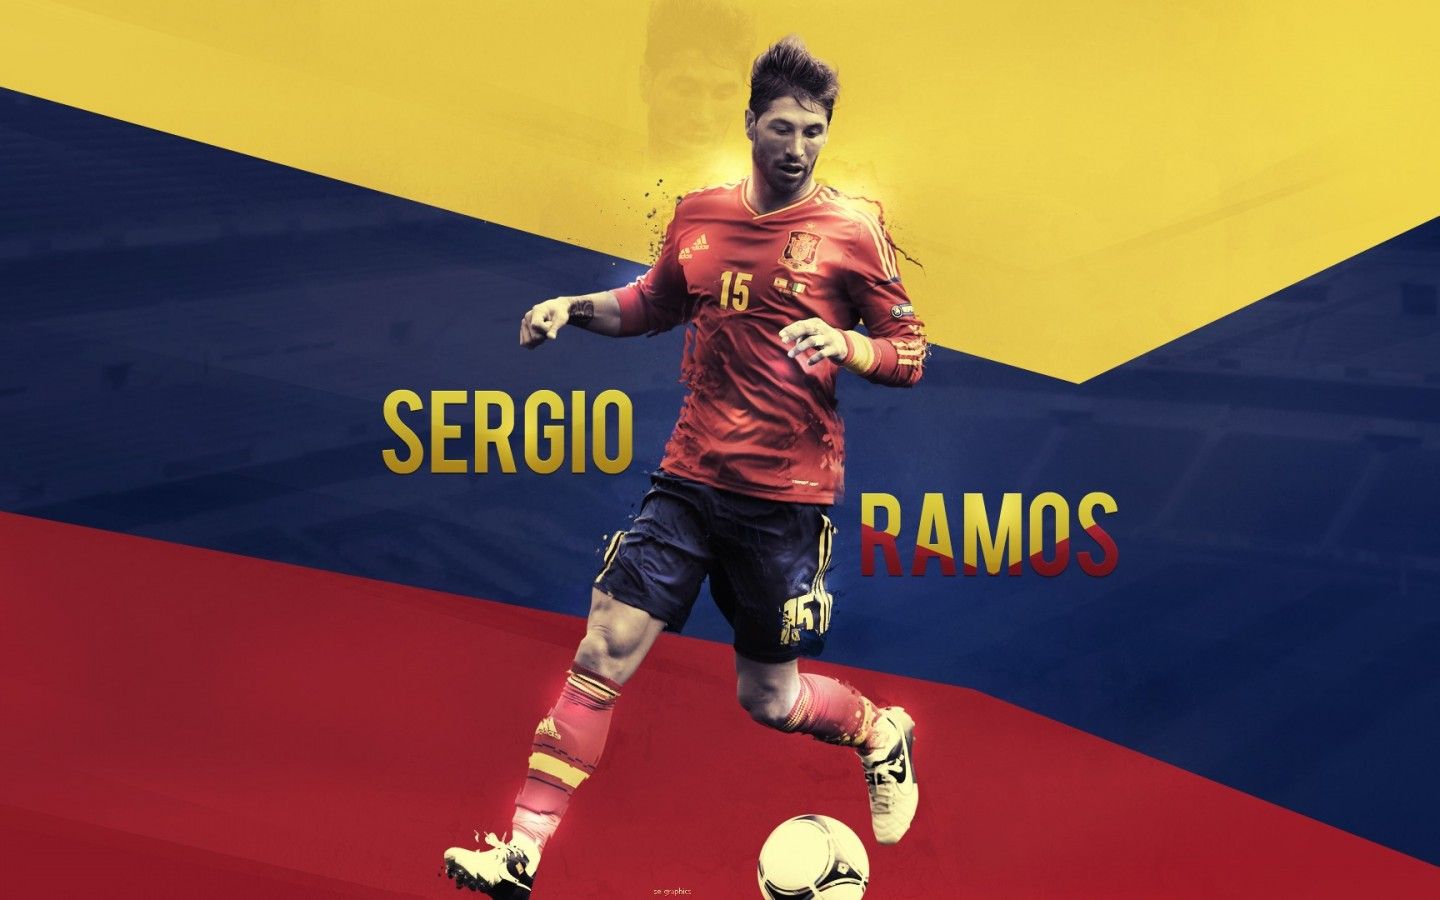 National team sergio ramos hd wallpaper - Background Wallpapers